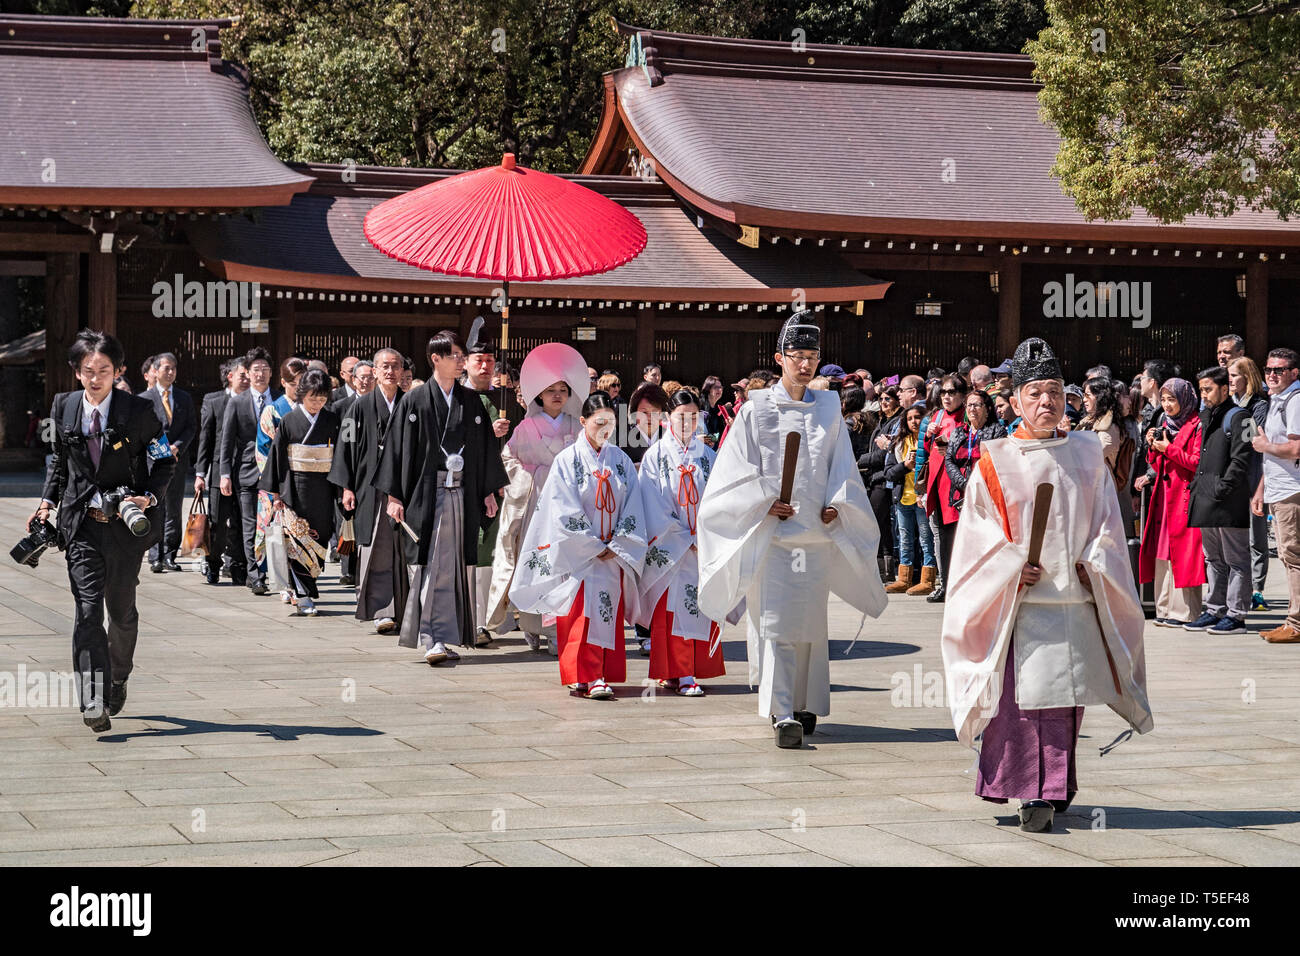 24 March 2019: Tokyo, Japan - Procession forming part of a traditional Shinto marriage ceremony at the Meiji Jingu shrine in Tokyo. Stock Photo